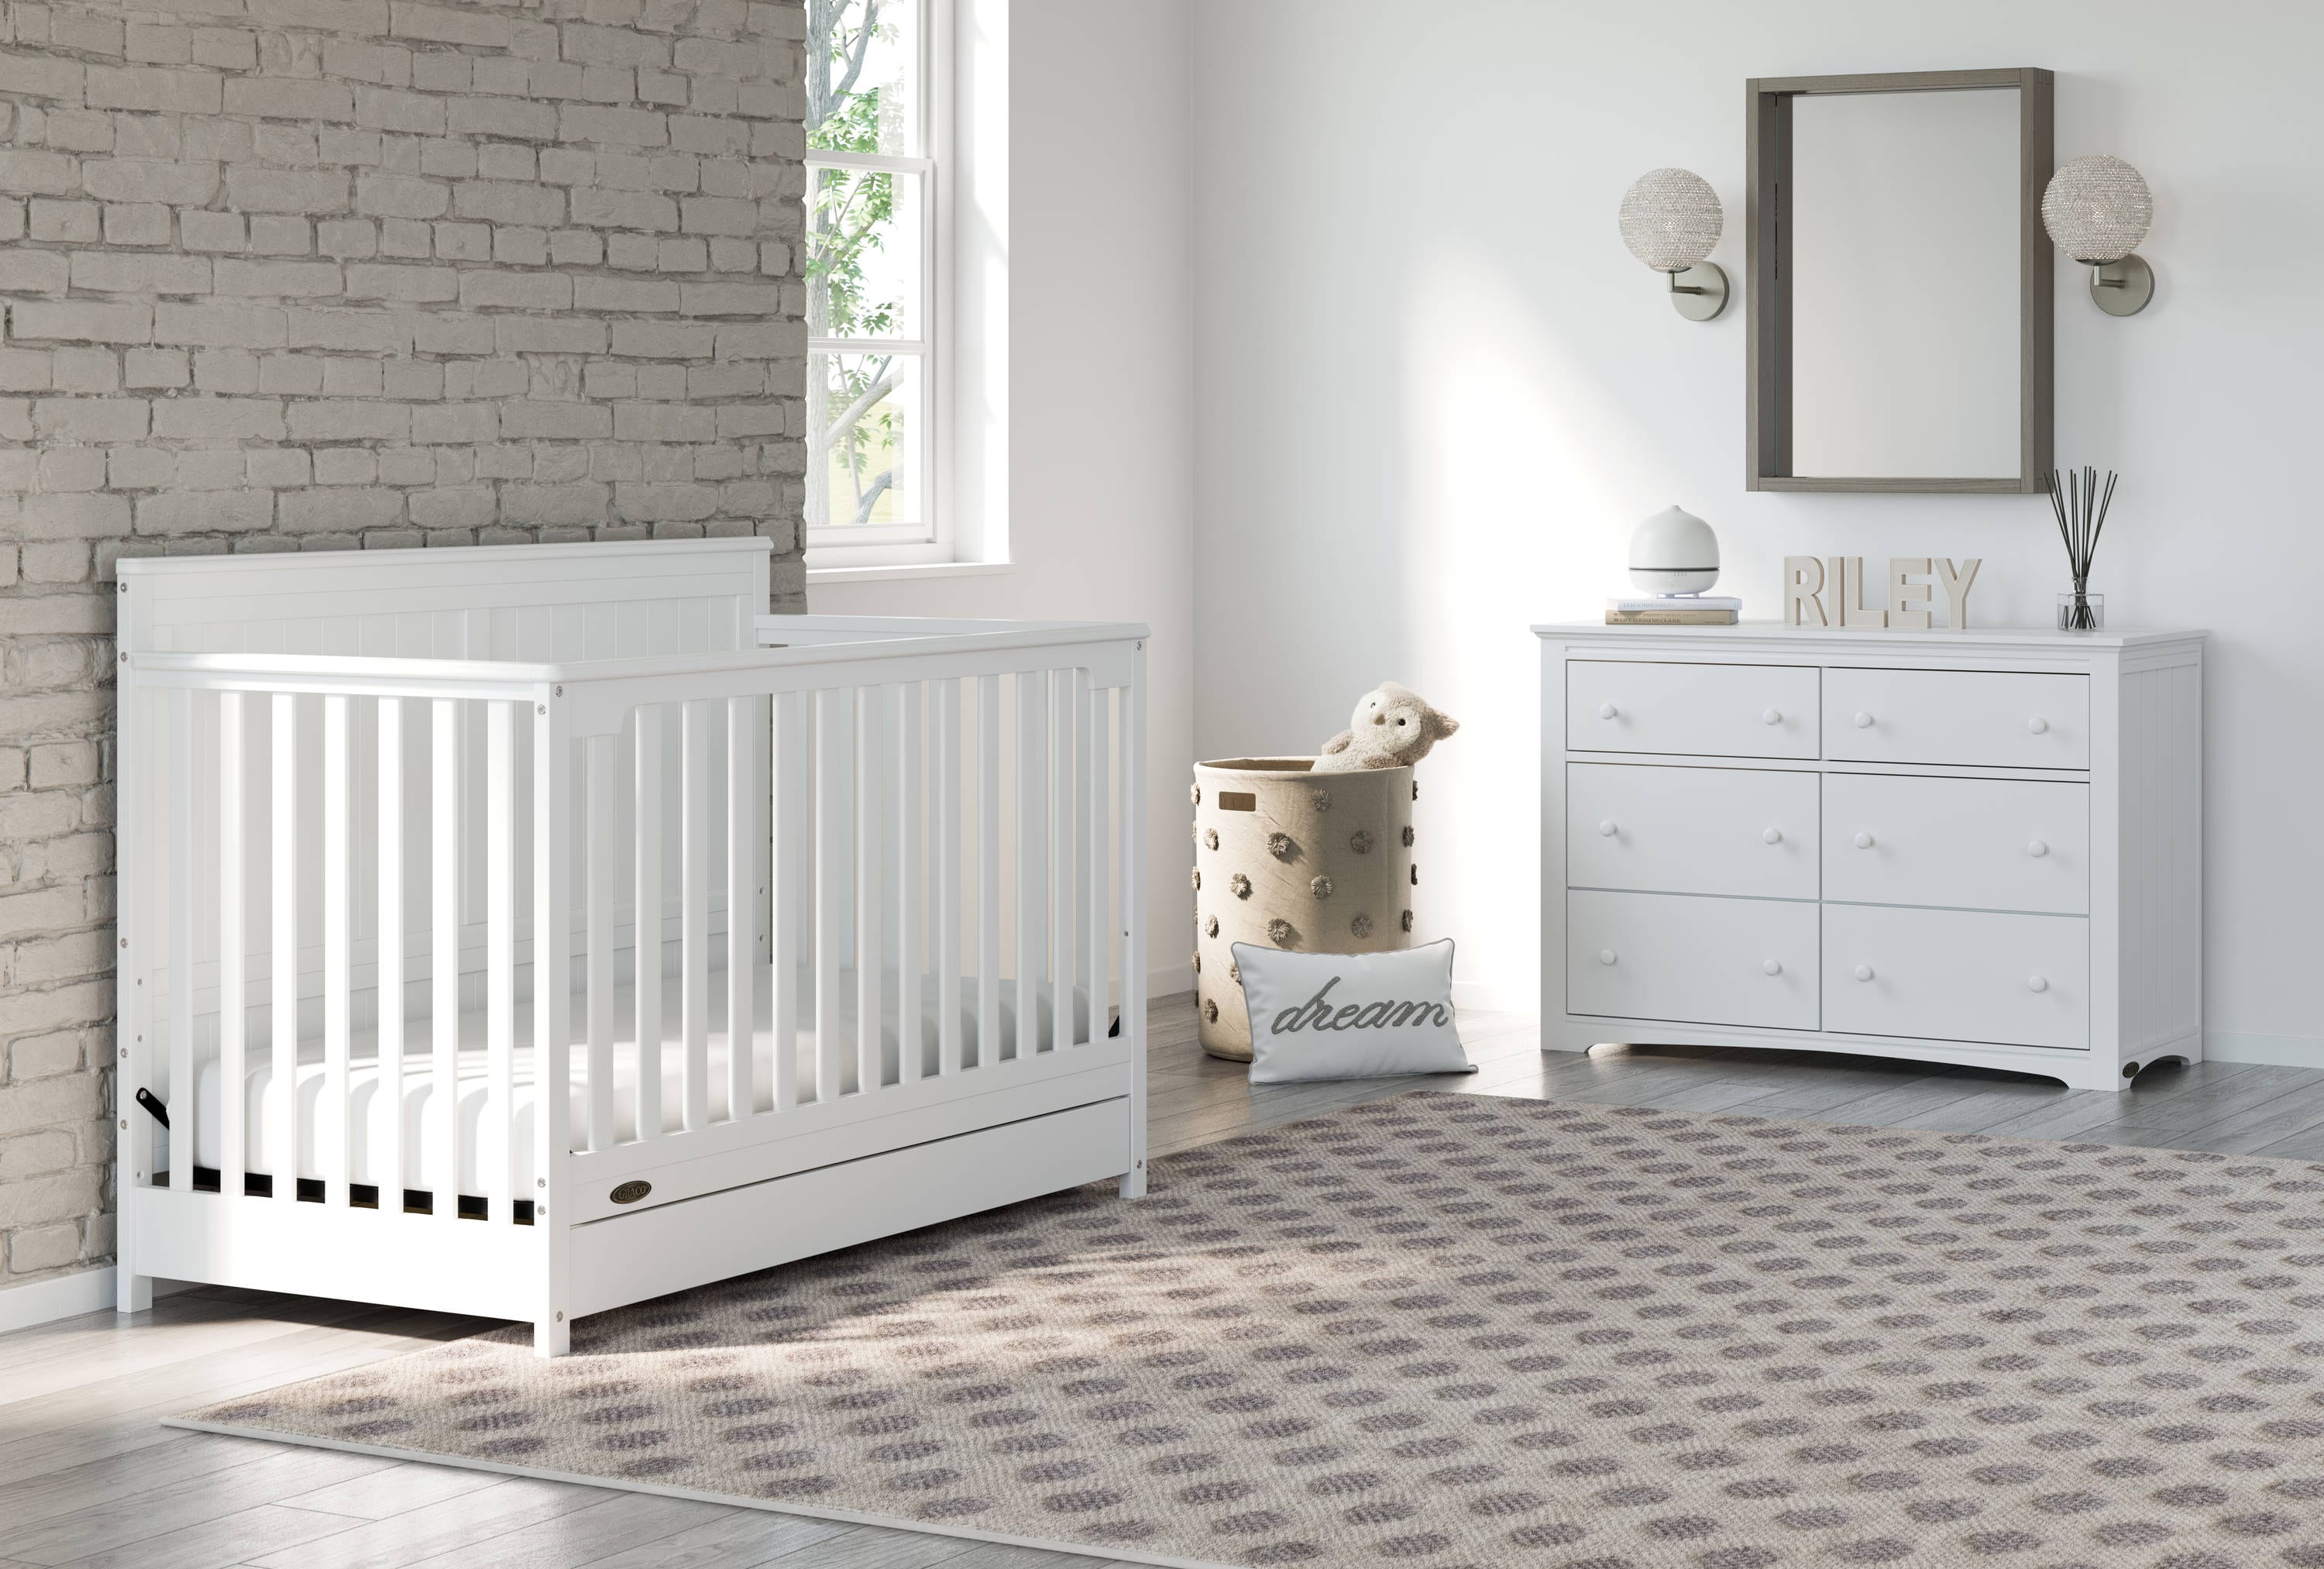 White Easily Converts to Toddler Bed Day Bed or Full Bed Three Position Adjustable Height Mattress Graco Hadley 4-in-1 Convertible Crib with Drawer Mattress Not Included Some Assembly Required 